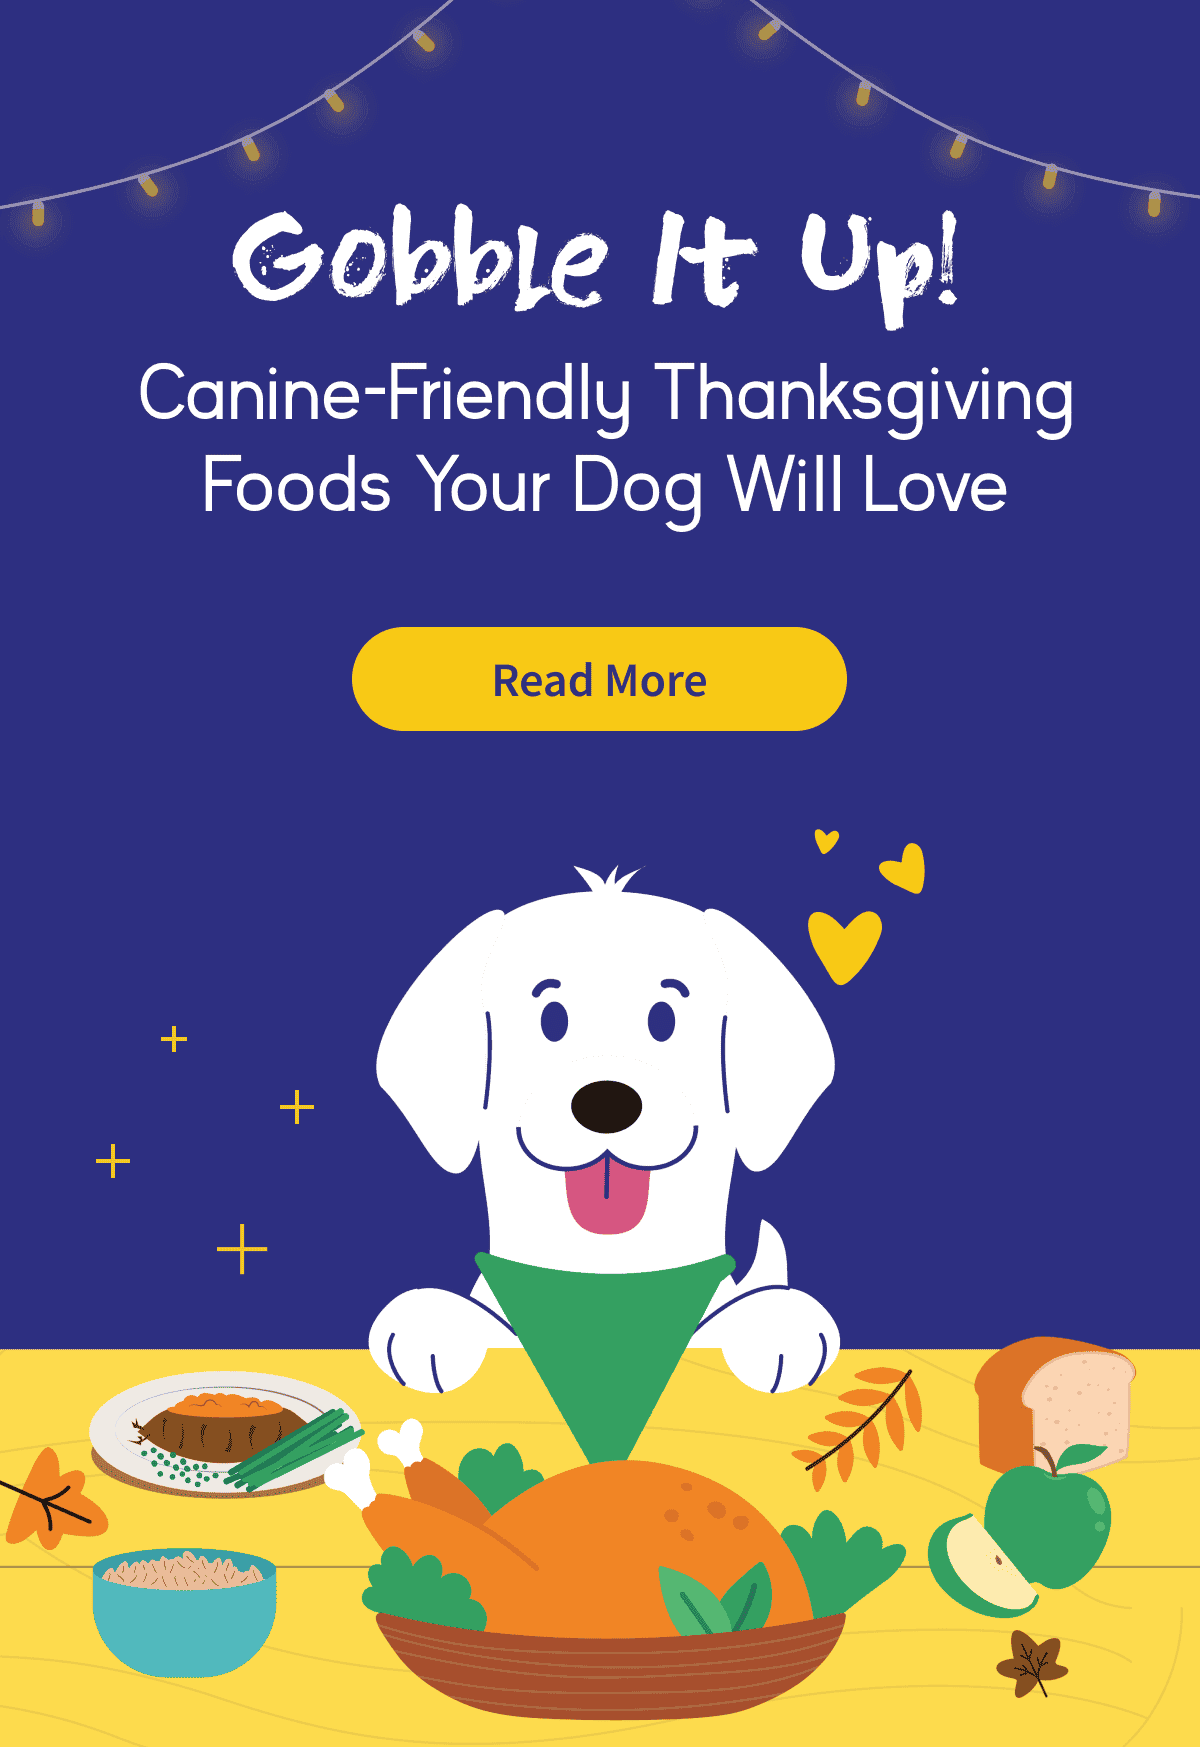 Canine-friendly Thanksgiving Foods!